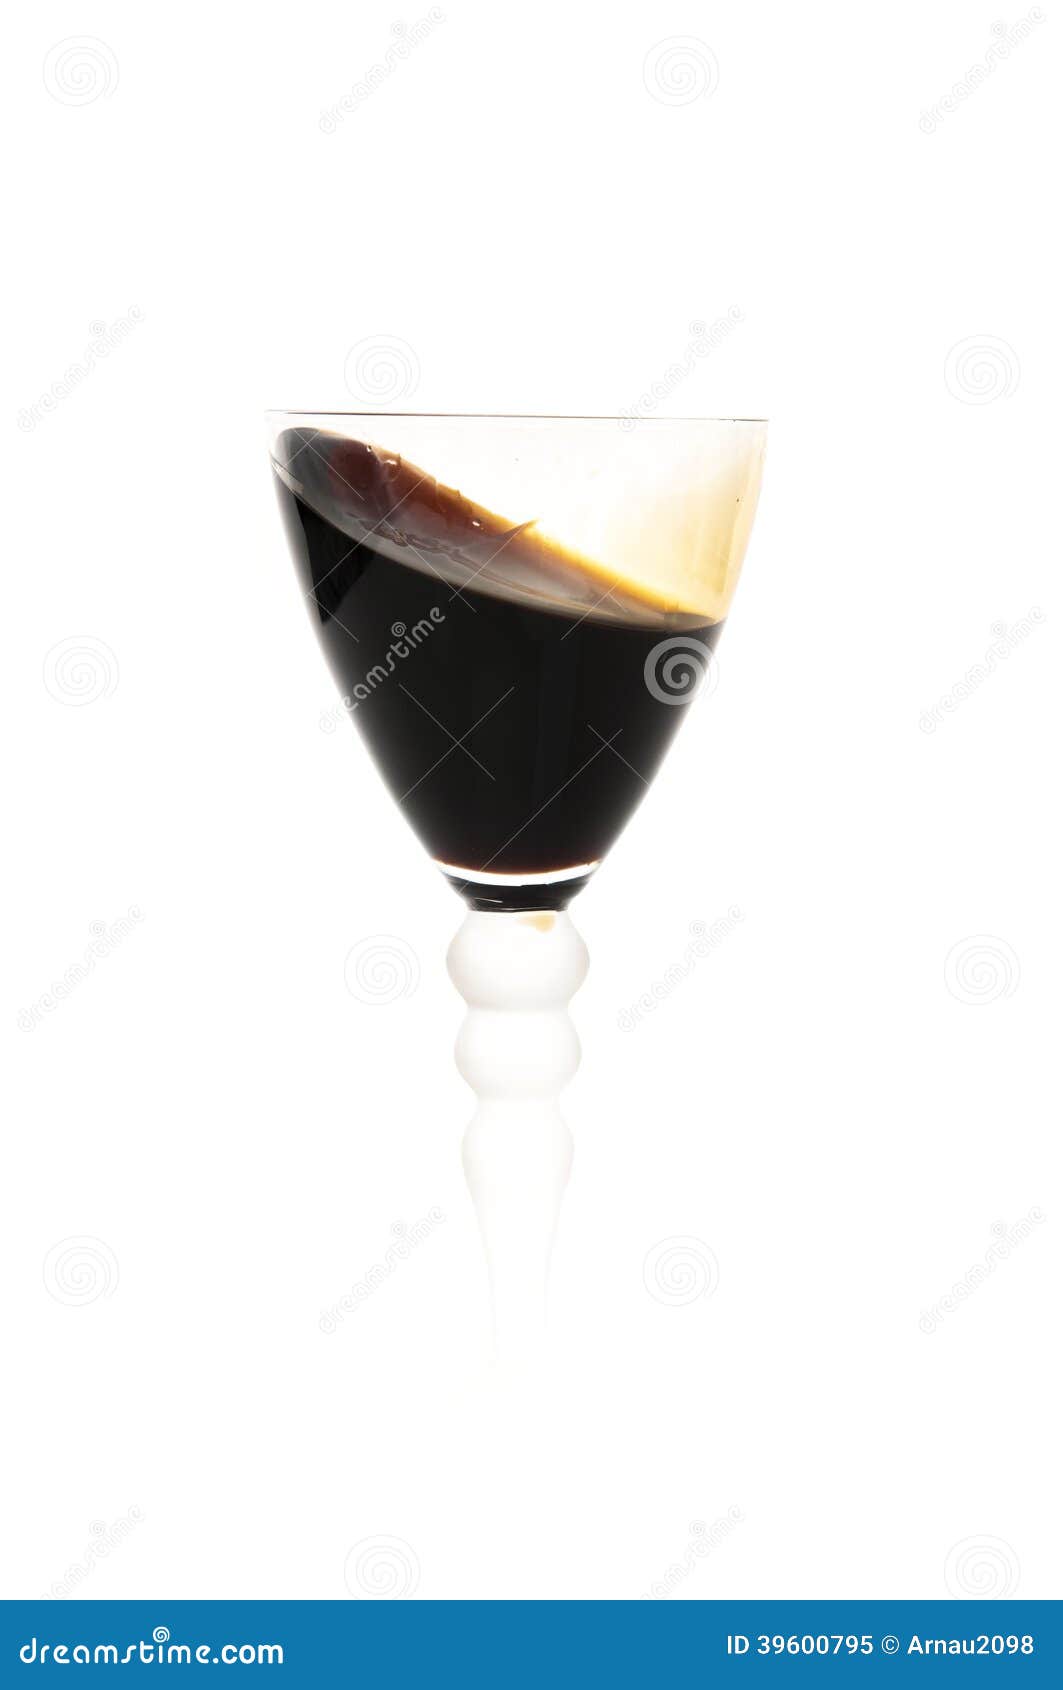 glass with red wine